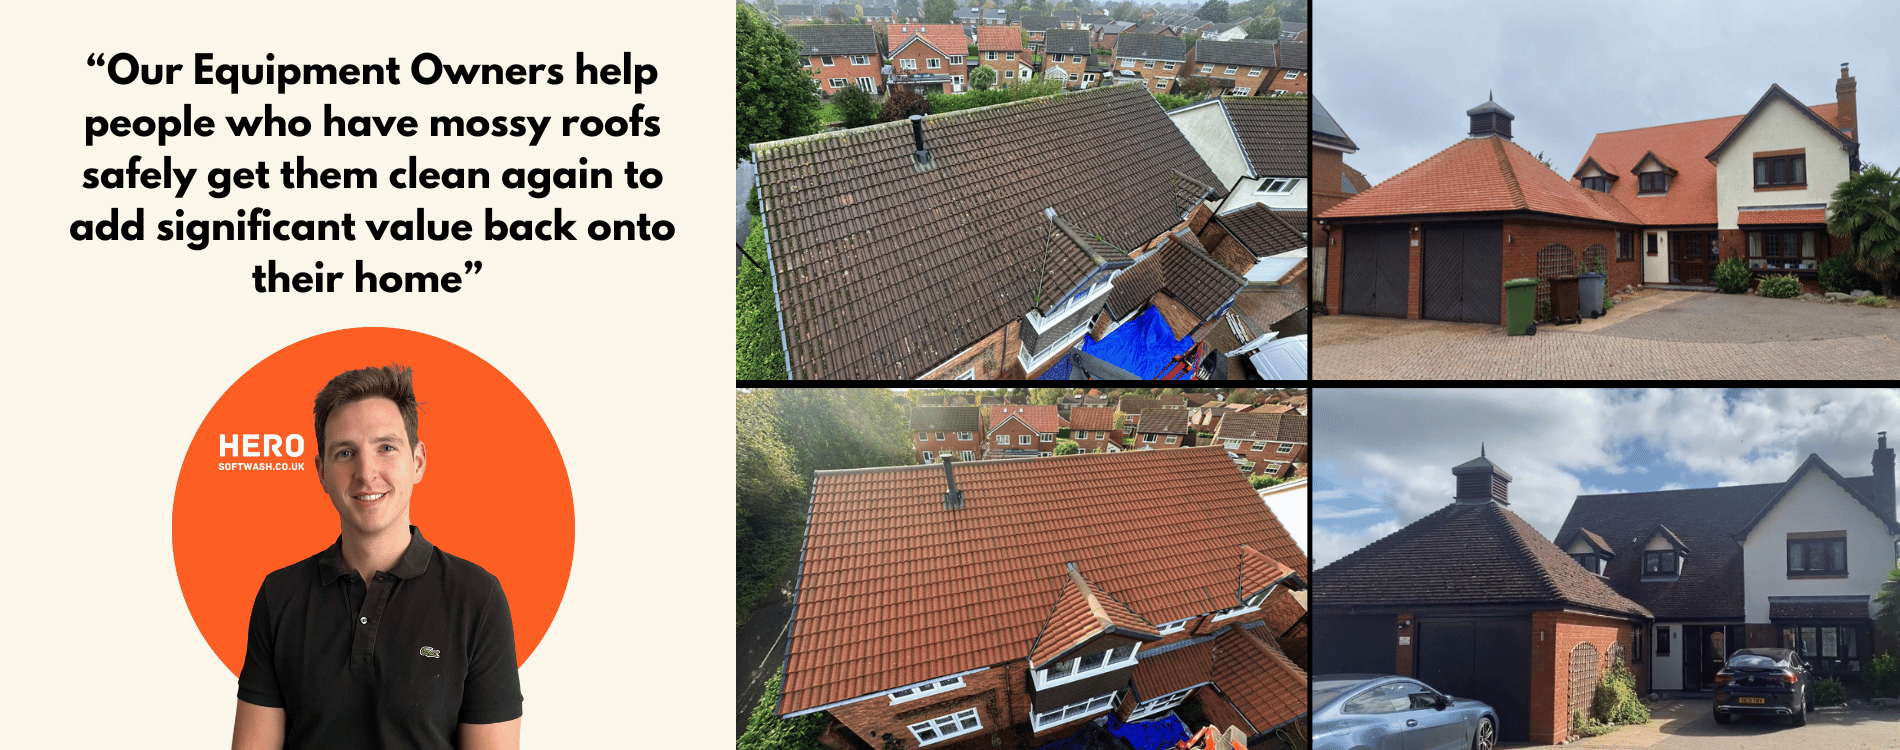 Professional roof cleaning and moss removal service in Solihull, West Midlands 